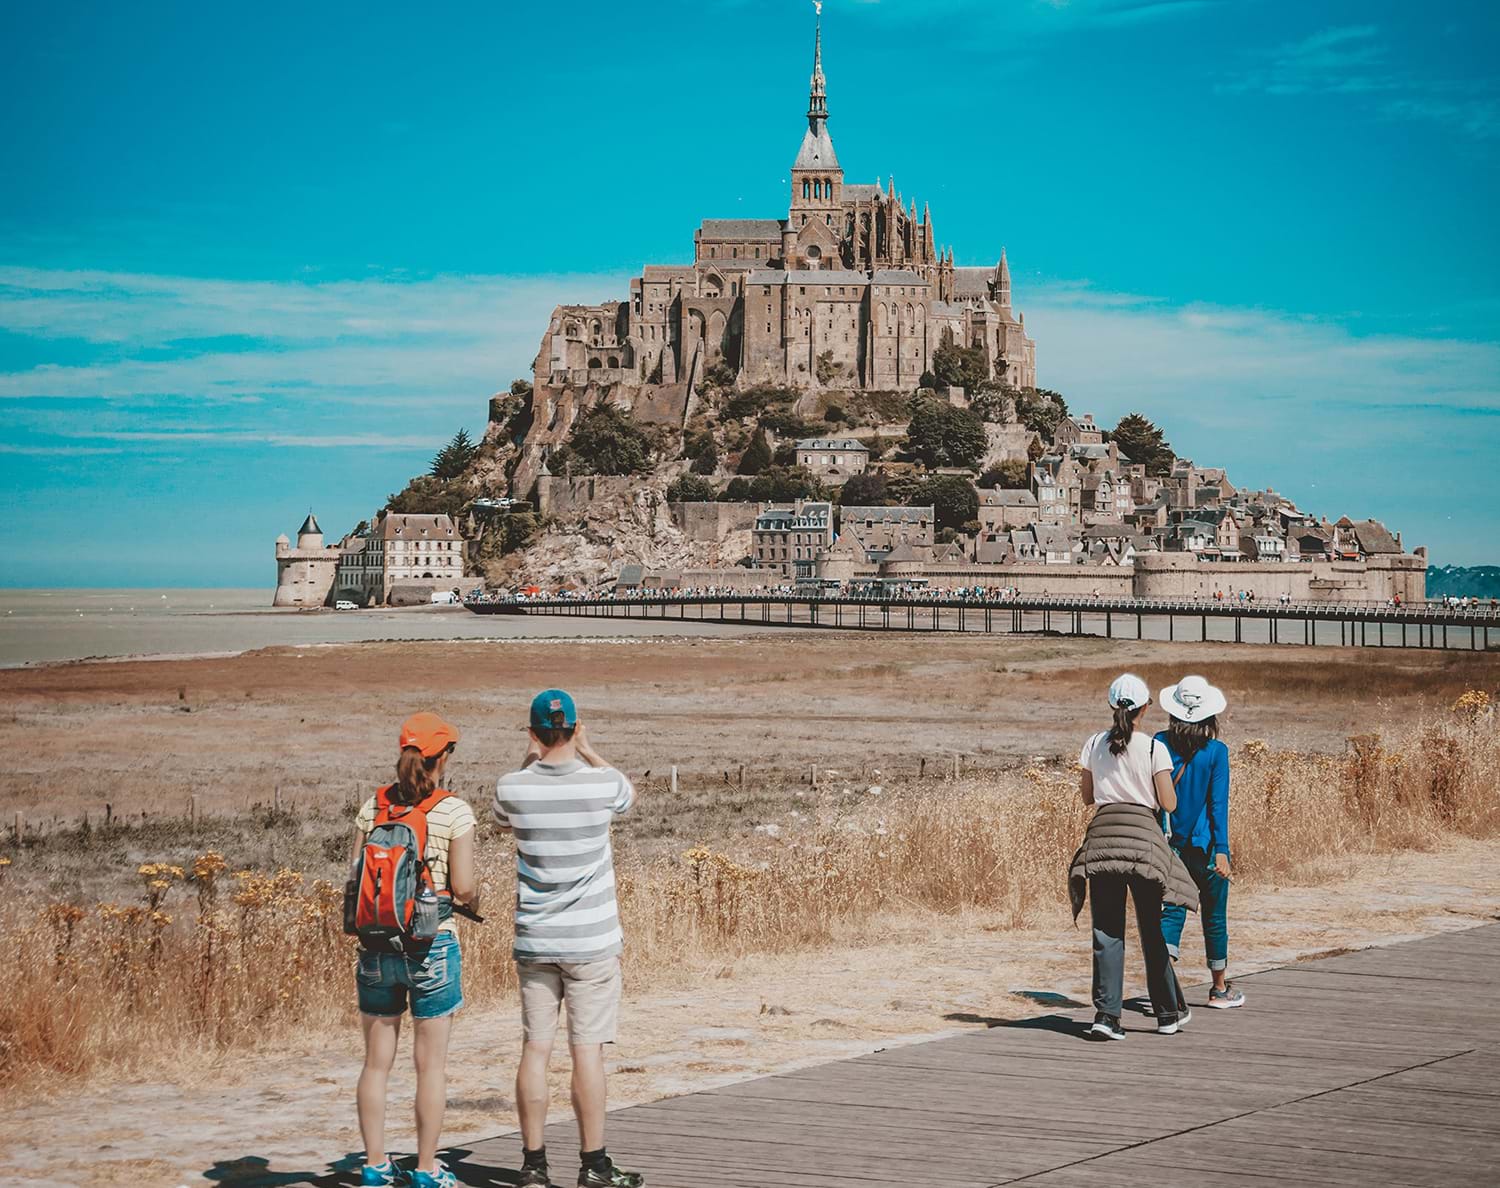 Tourists looking at castle and surrounding town